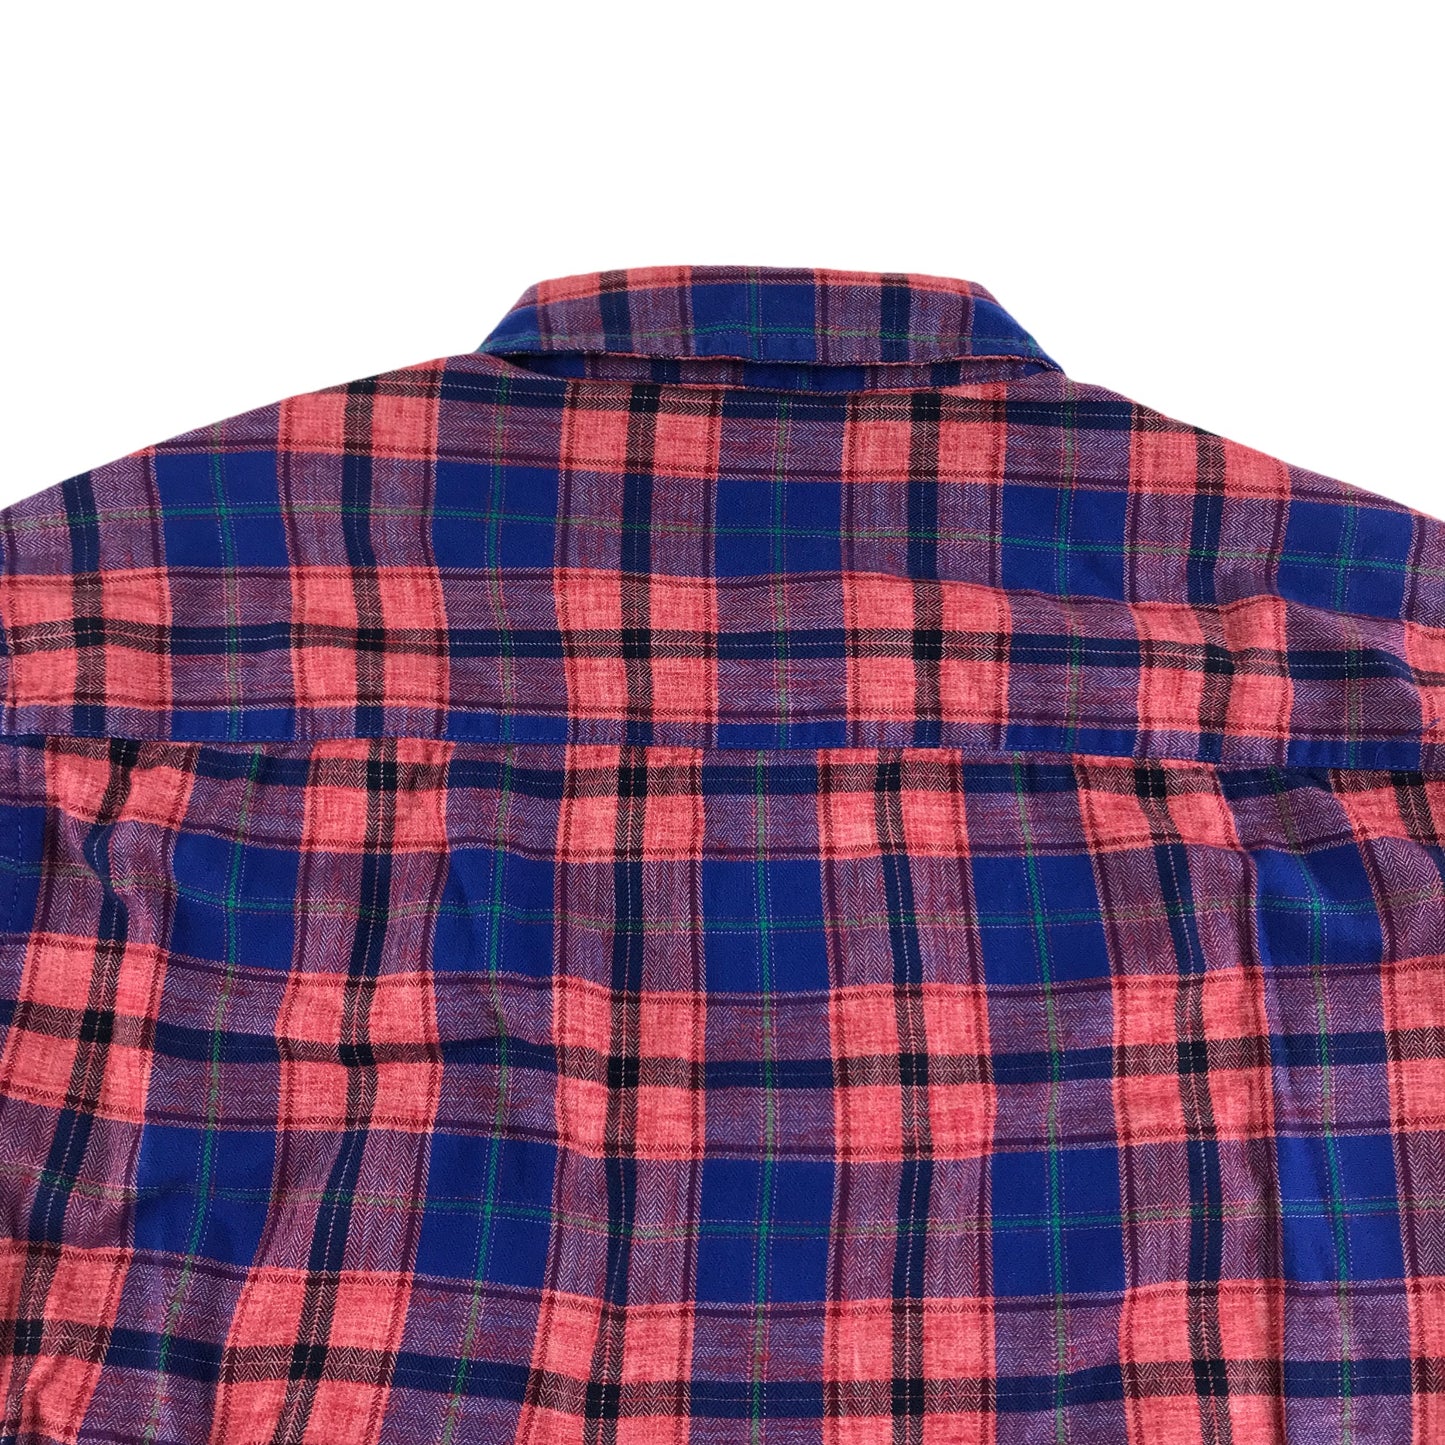 Benetton Shirt Size S Blue Red Checked Long Sleeve Button Up